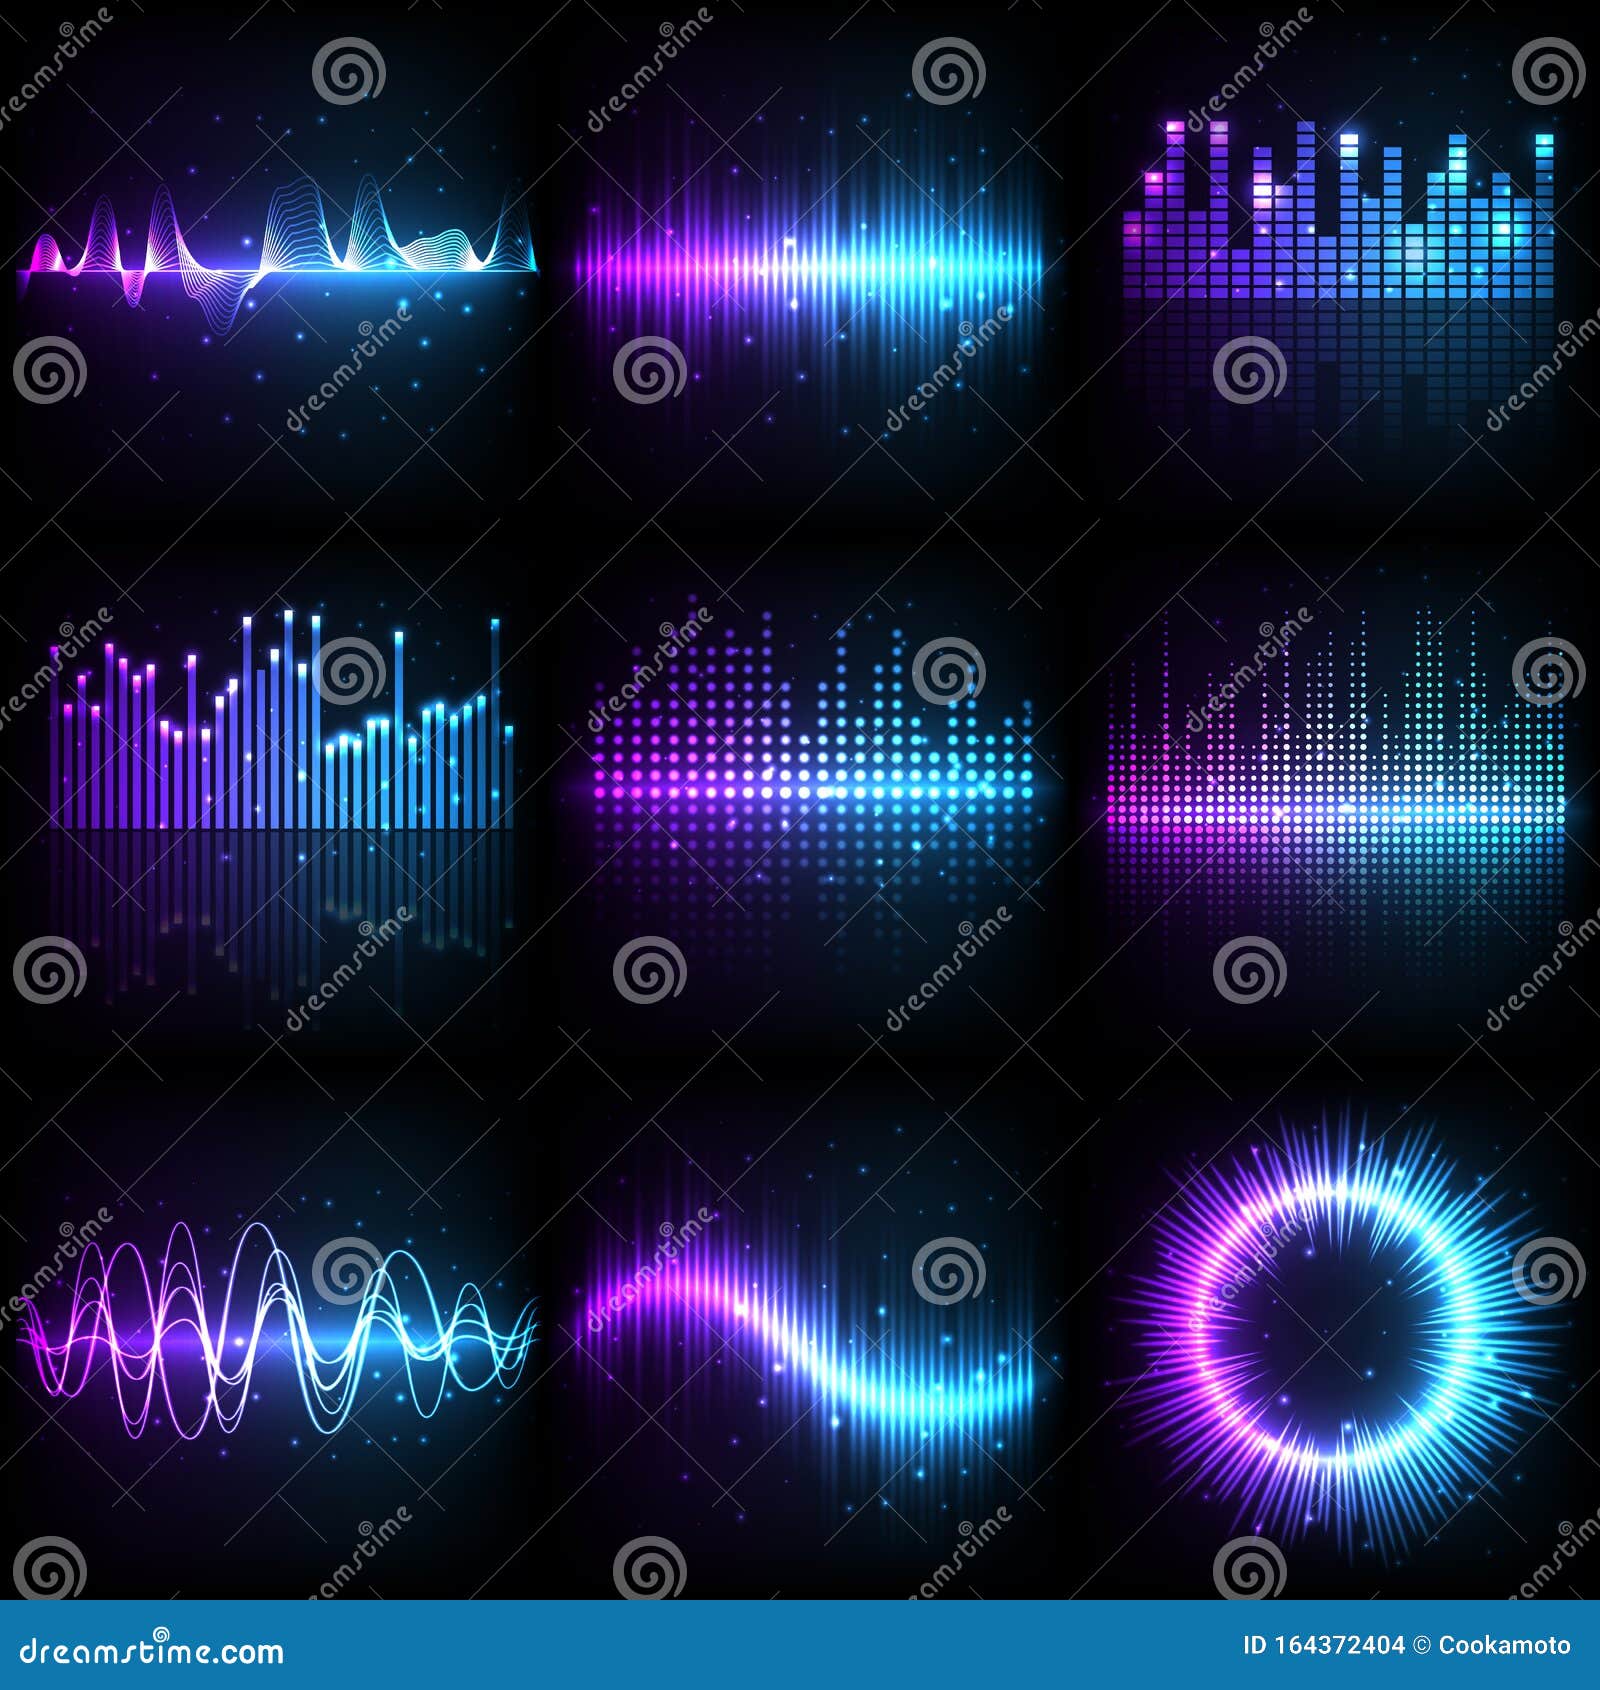 Audio Sound Frequency Spectrum Stock Vector (Royalty Free) 1370555030